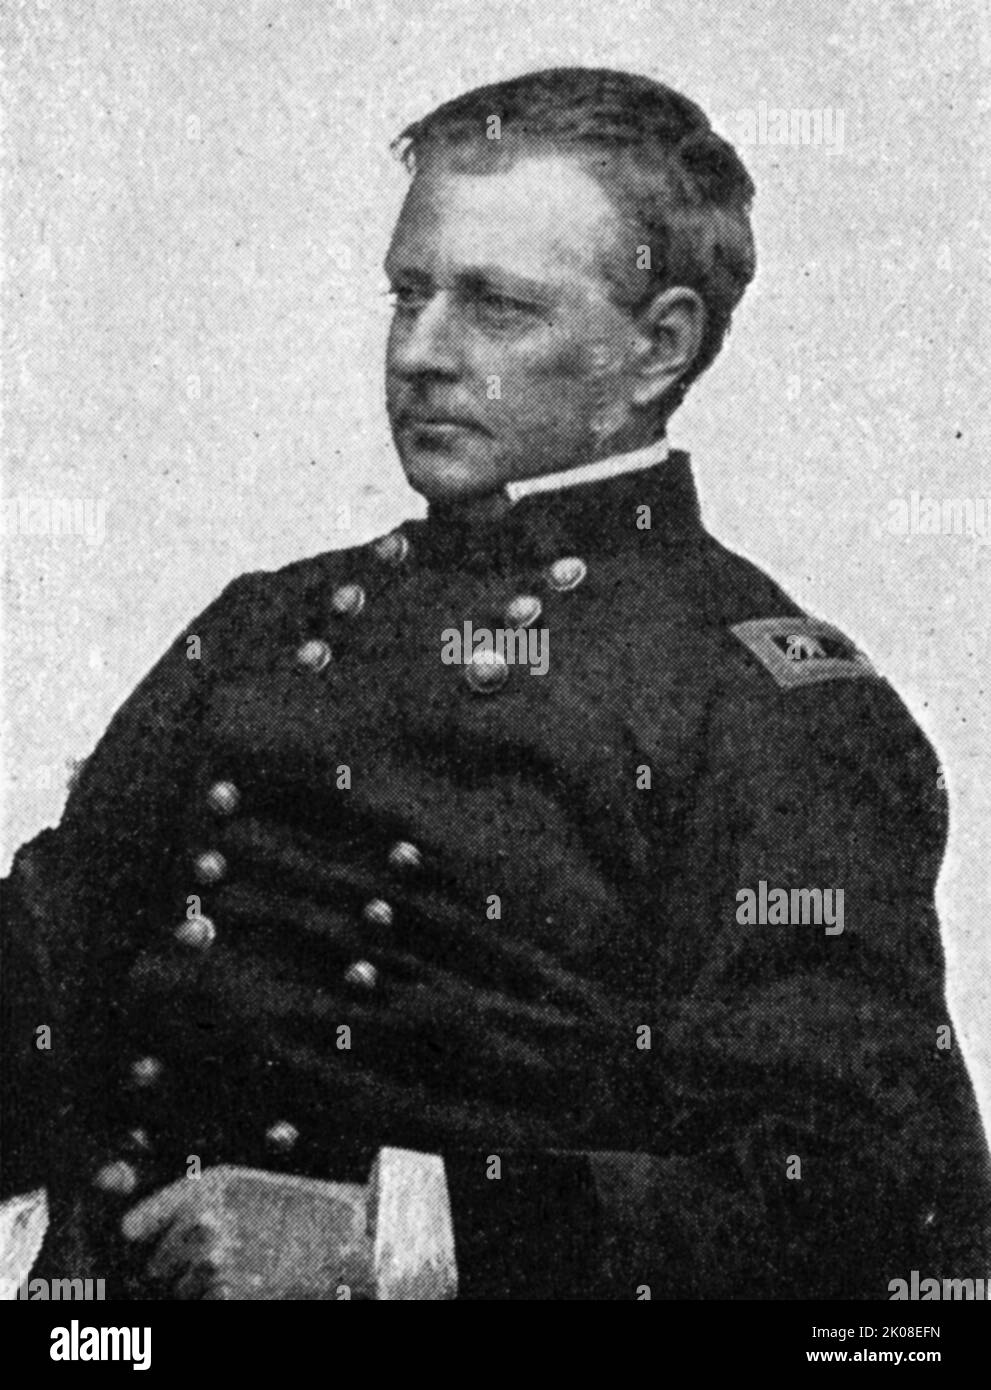 Joseph Hooker (November 13, 1814 - October 31, 1879) was an American Civil War general for the Union, chiefly remembered for his decisive defeat by Confederate General Robert E. Lee at the Battle of Chancellorsville in 1863 Stock Photo